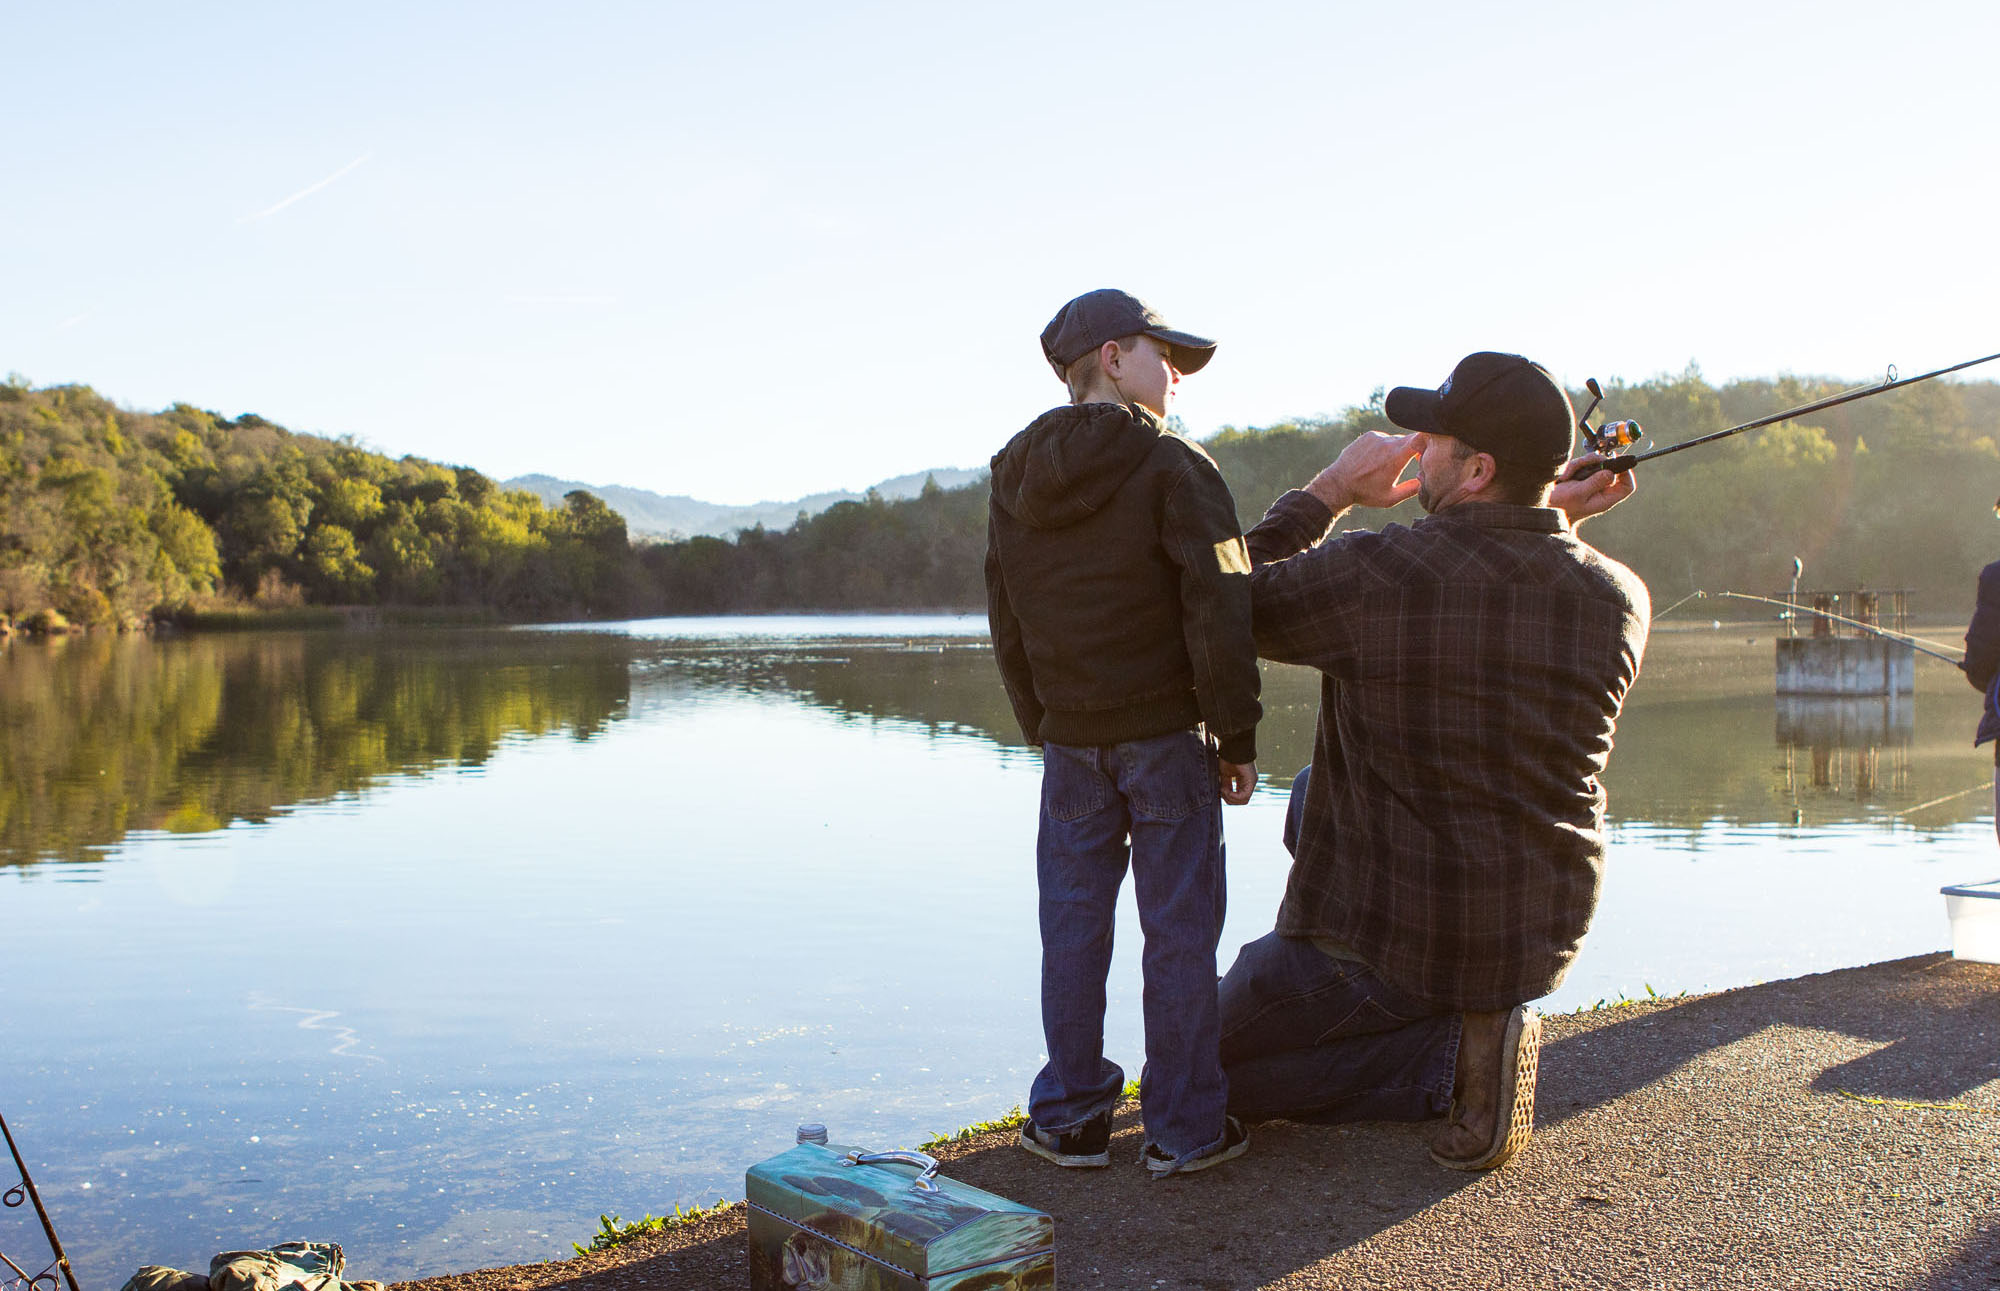 A father teaches his son how to cast a fishing rod and reel into a lake